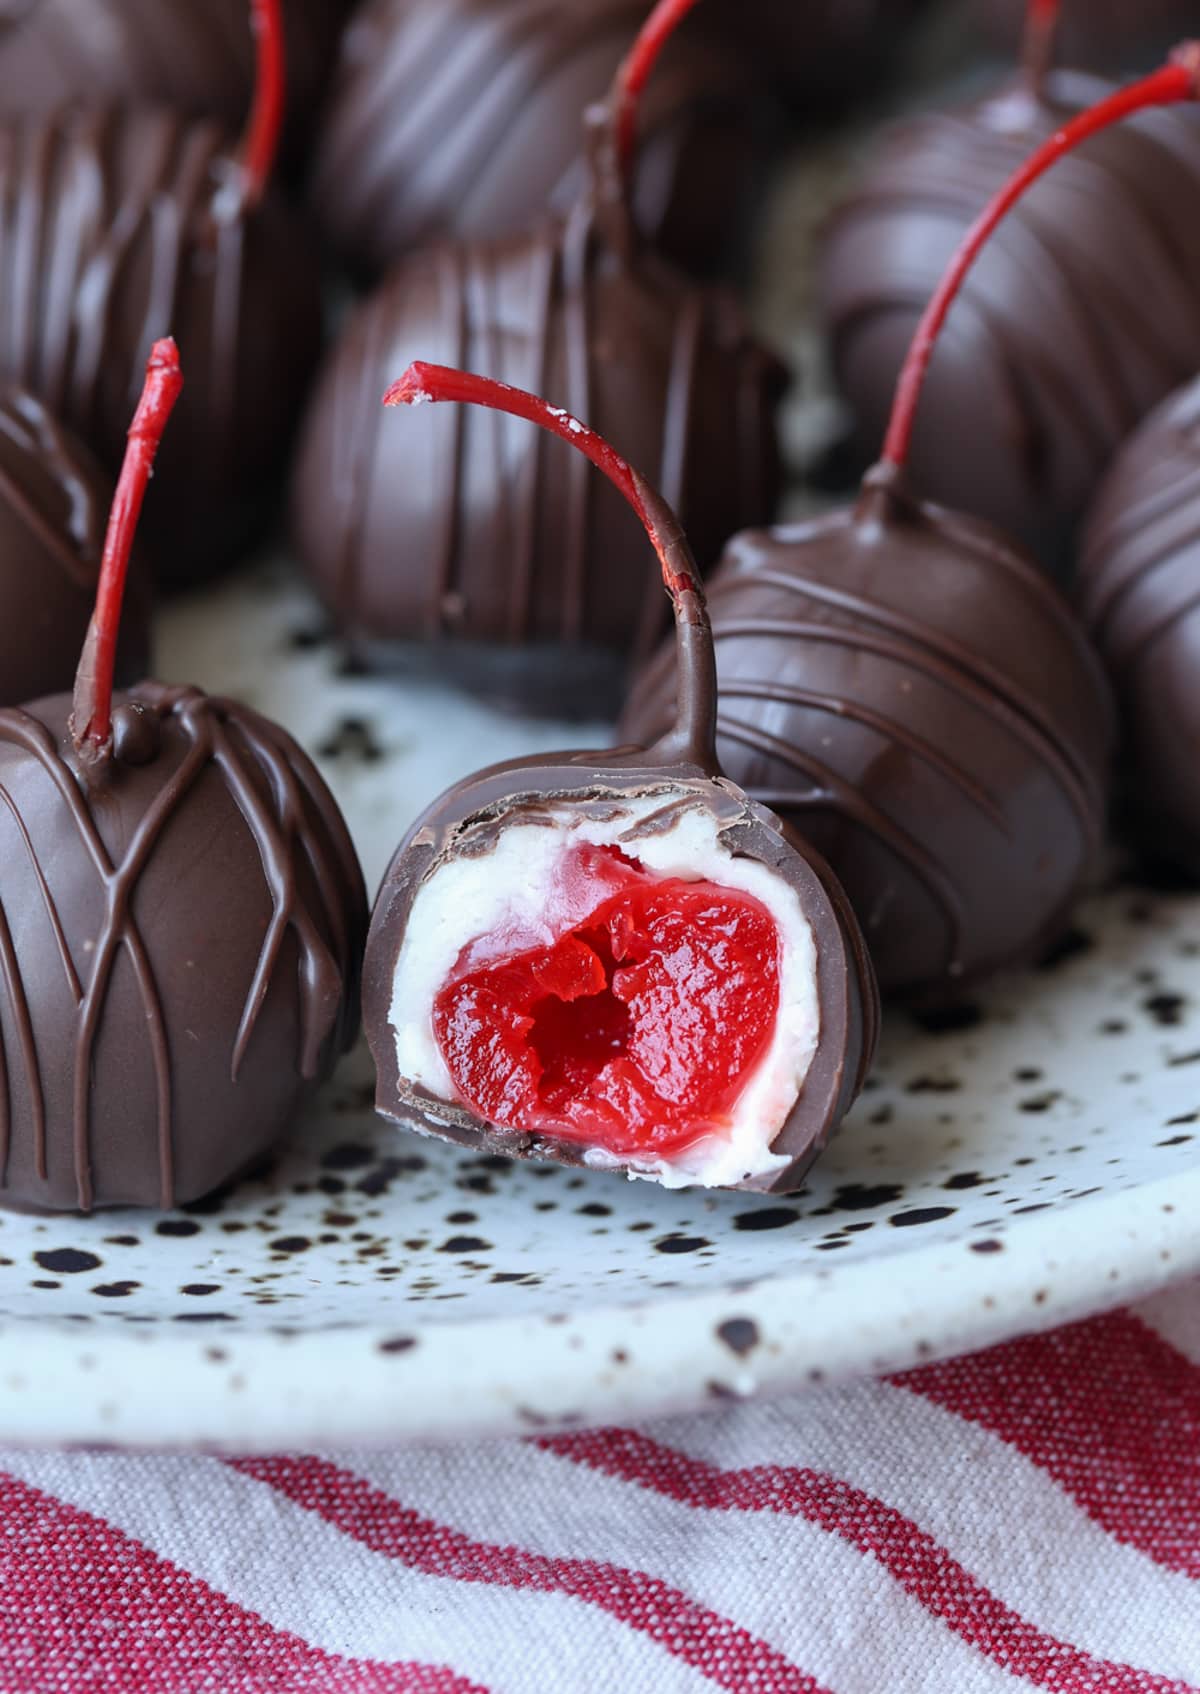 A chocolate covered cherry bitten in half on a plate showing the cherry, white sugar coating and chocolate shell.